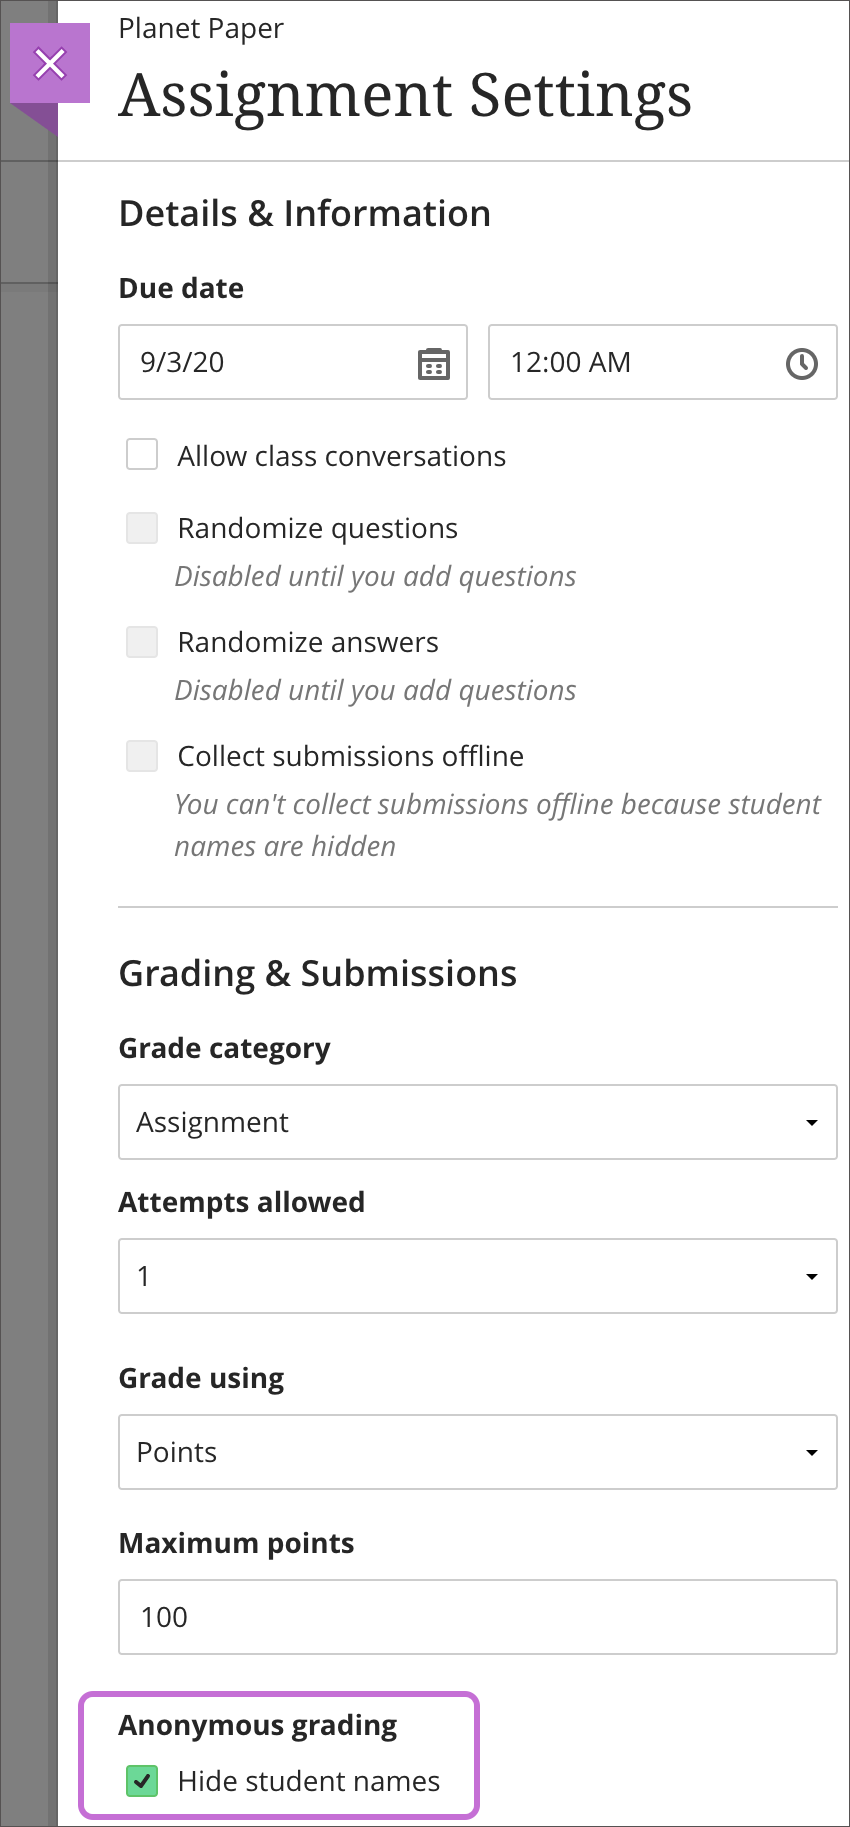 The Assignment settings panel is open with the "Hide student names" checkbox selected and the Anonymous grading section highlighted.